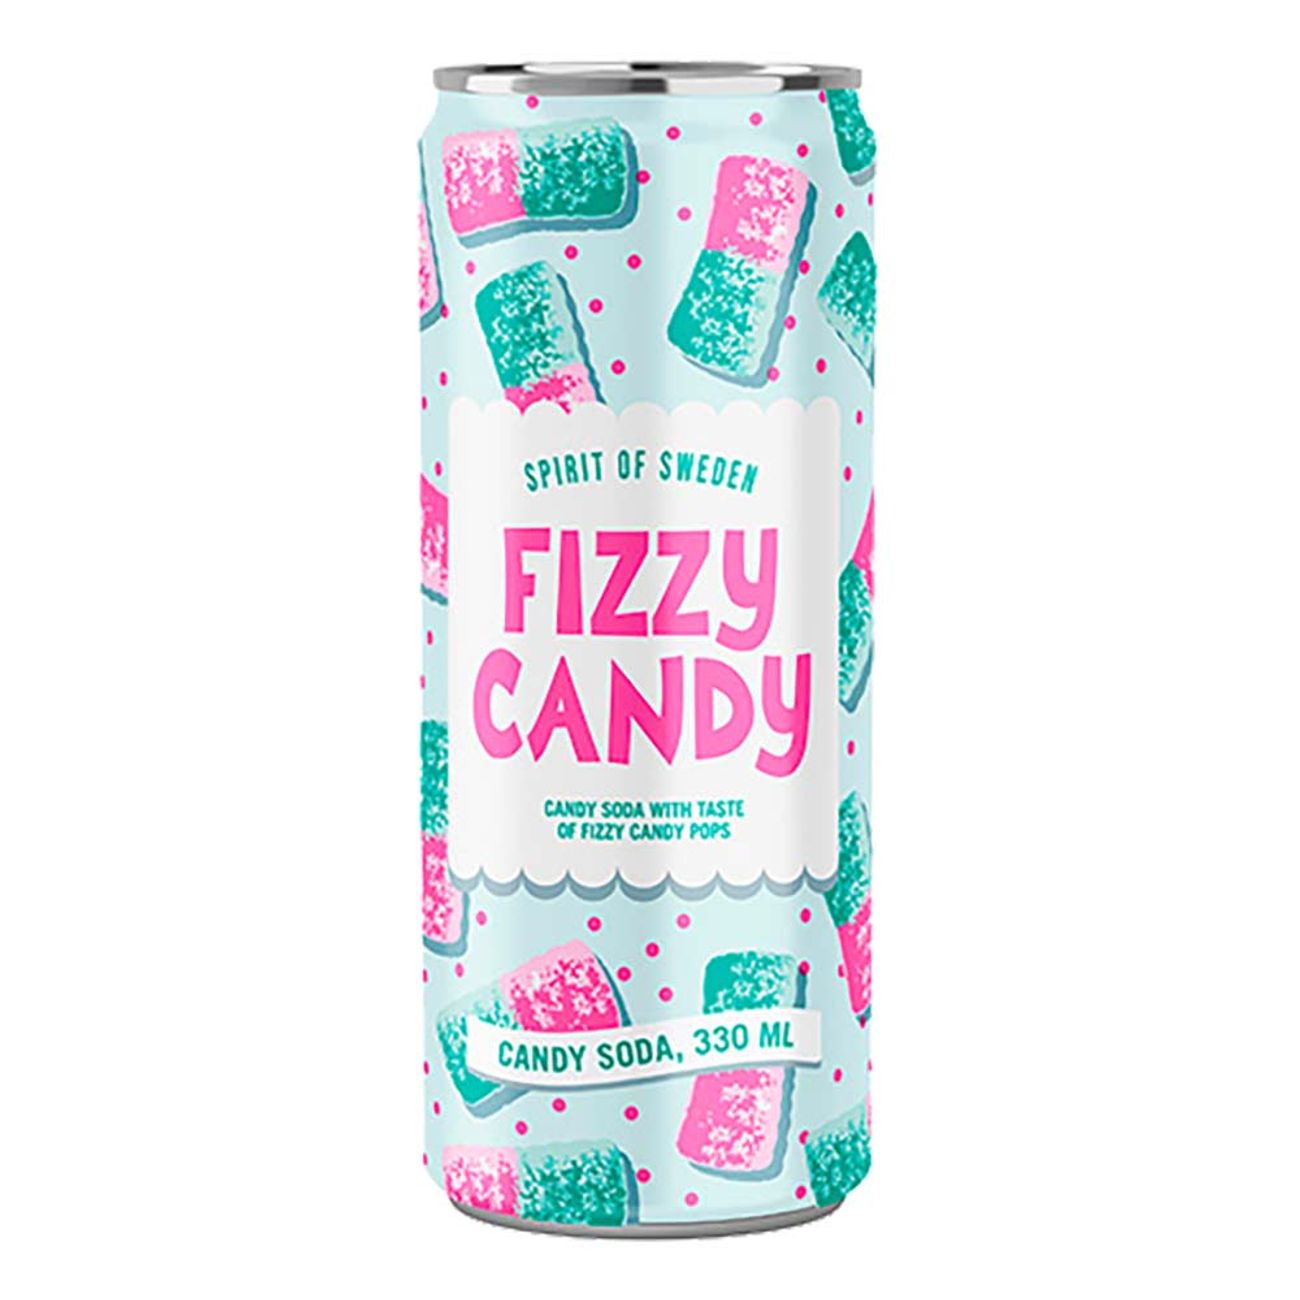 fizzy-candy-lask-94905-1